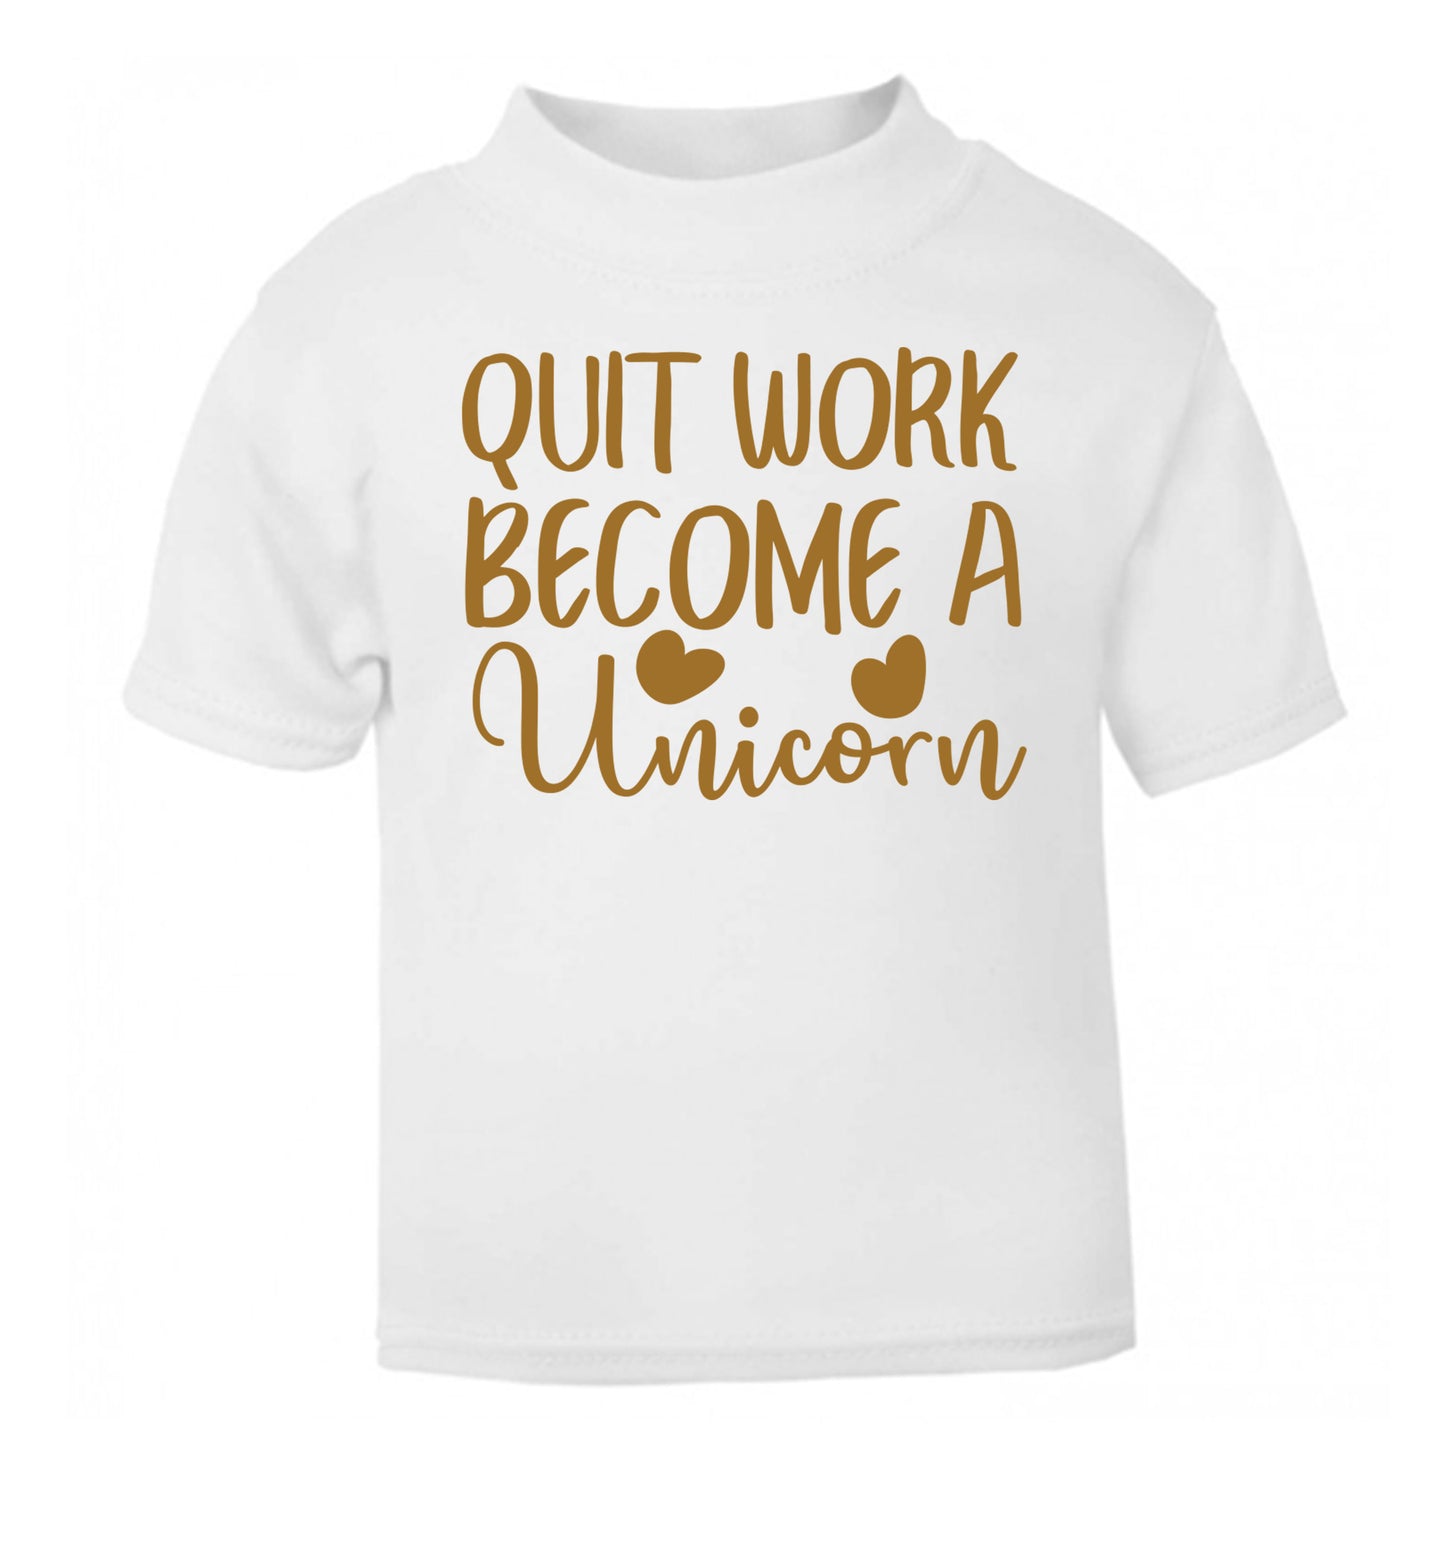 Quit work become a unicorn white Baby Toddler Tshirt 2 Years